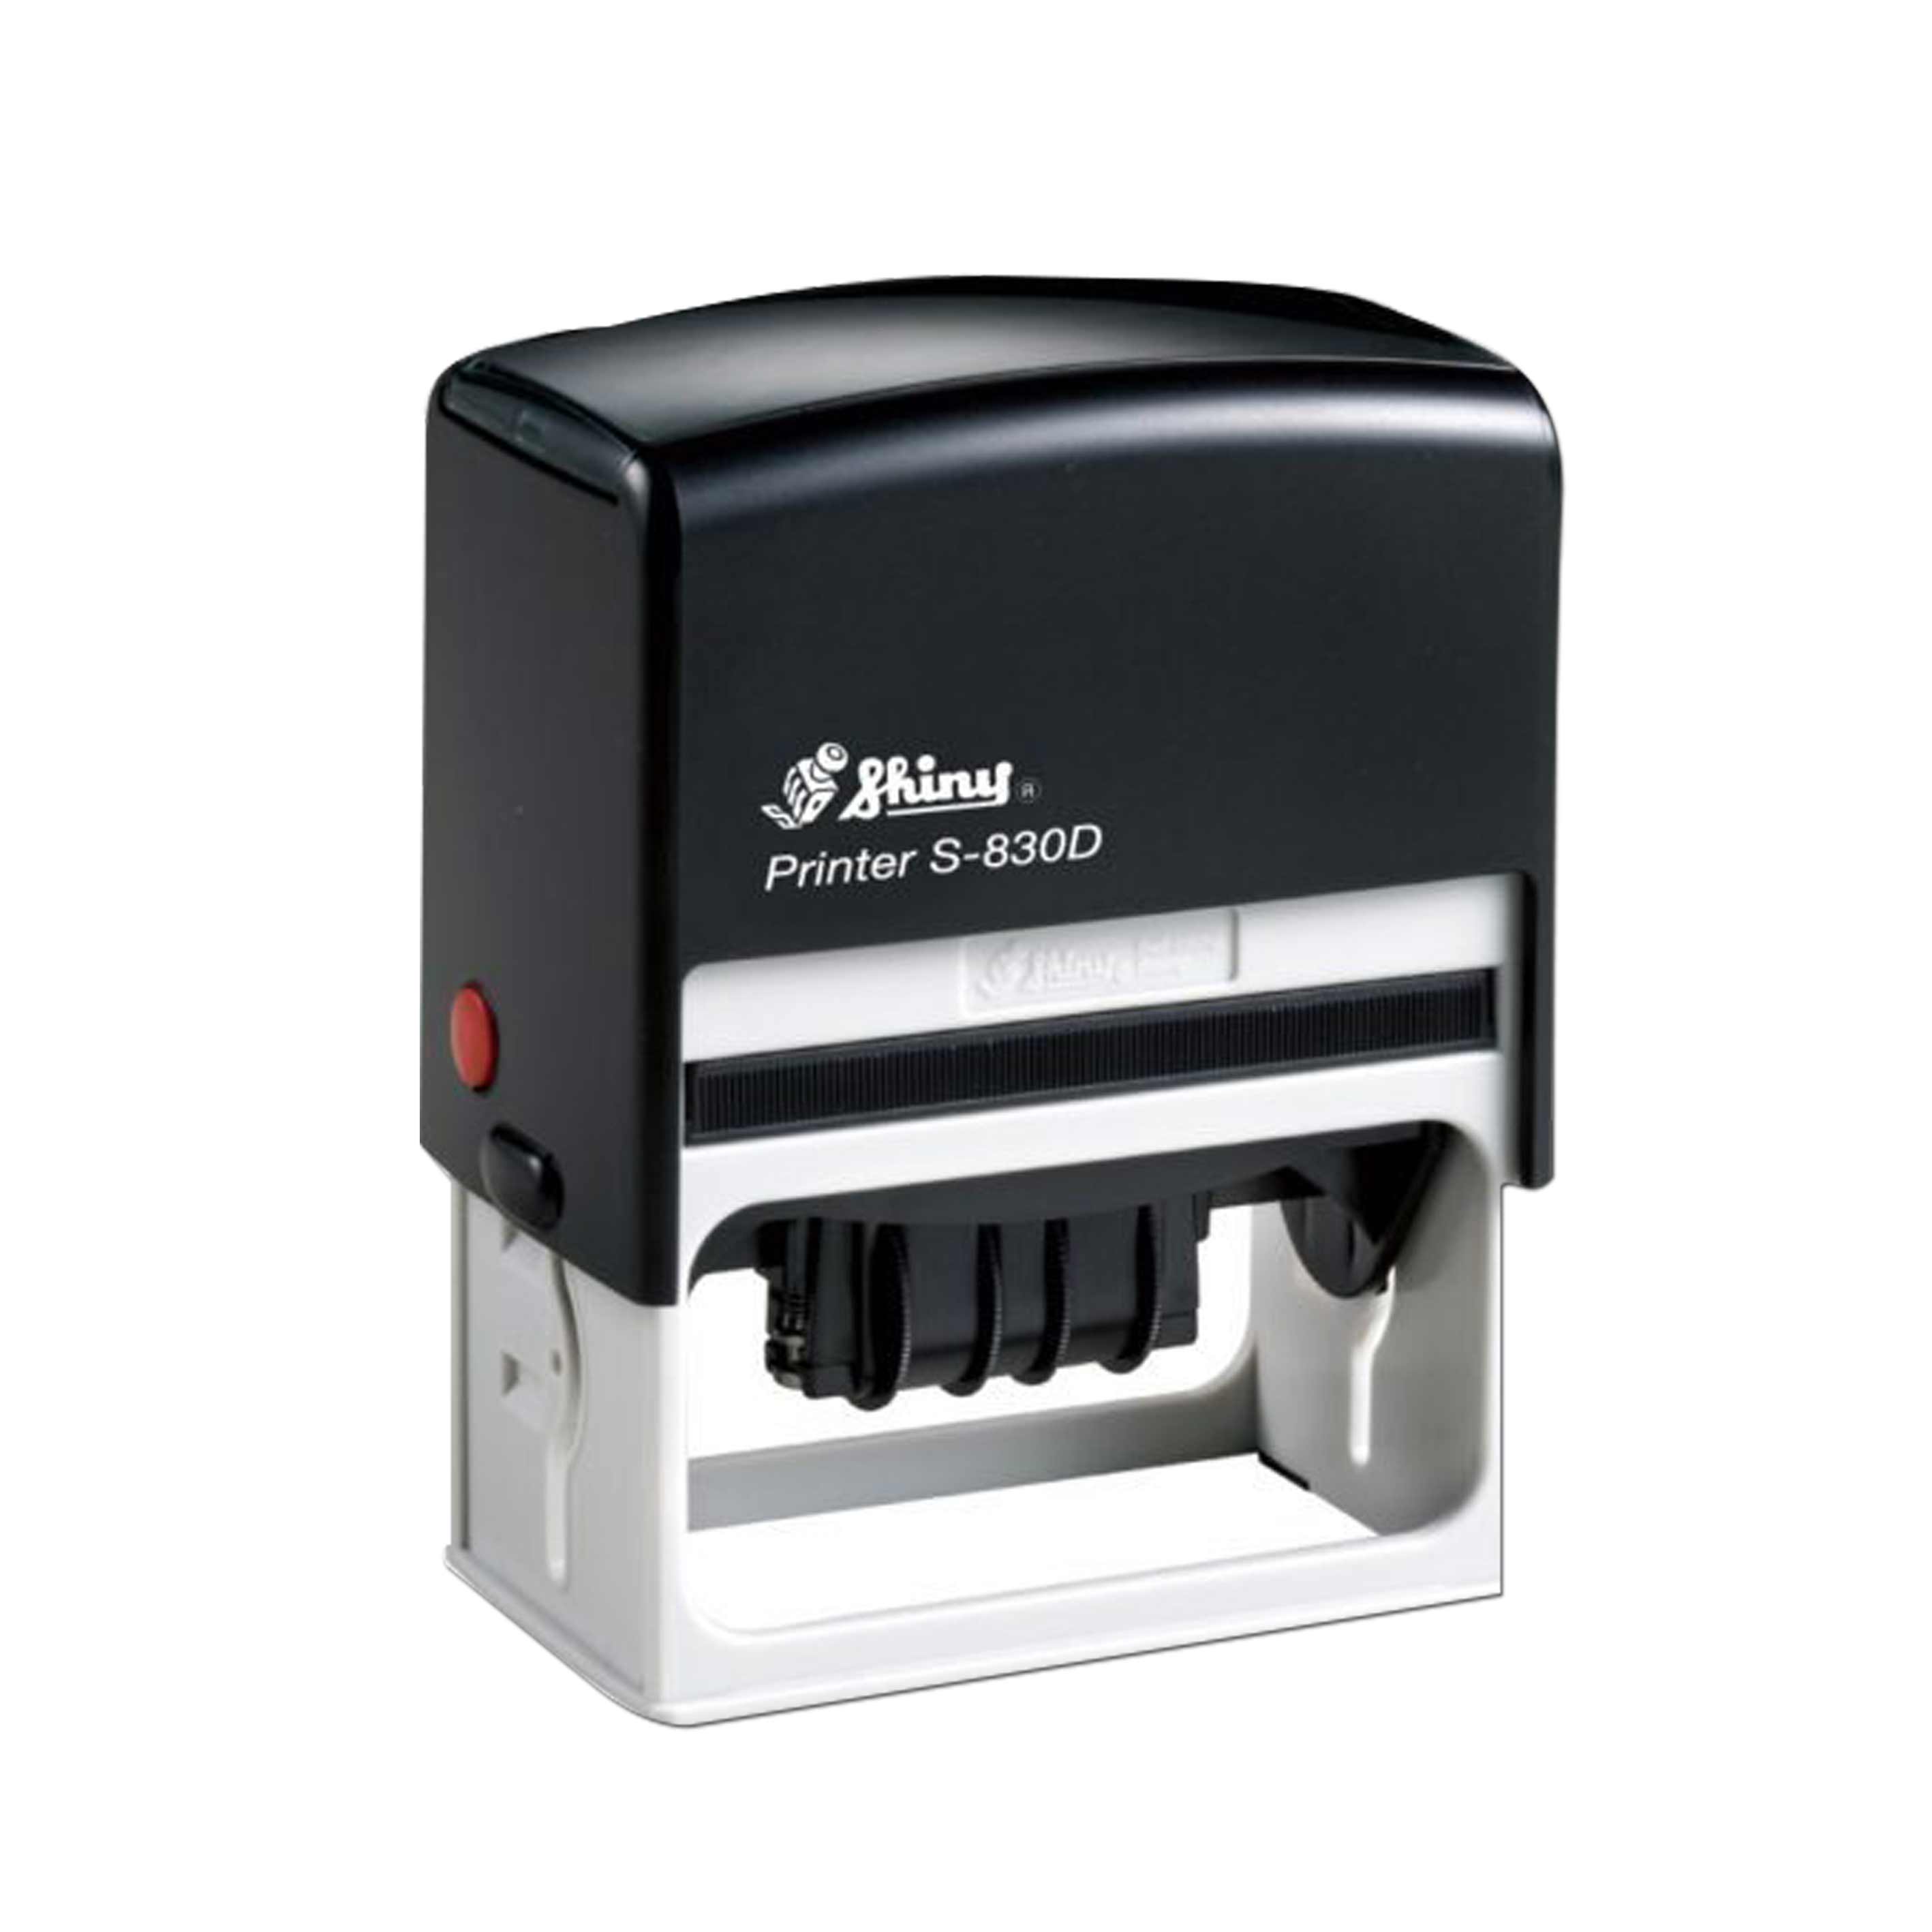 Personalized Dater Stamp Printer Ref S-830D Shiny